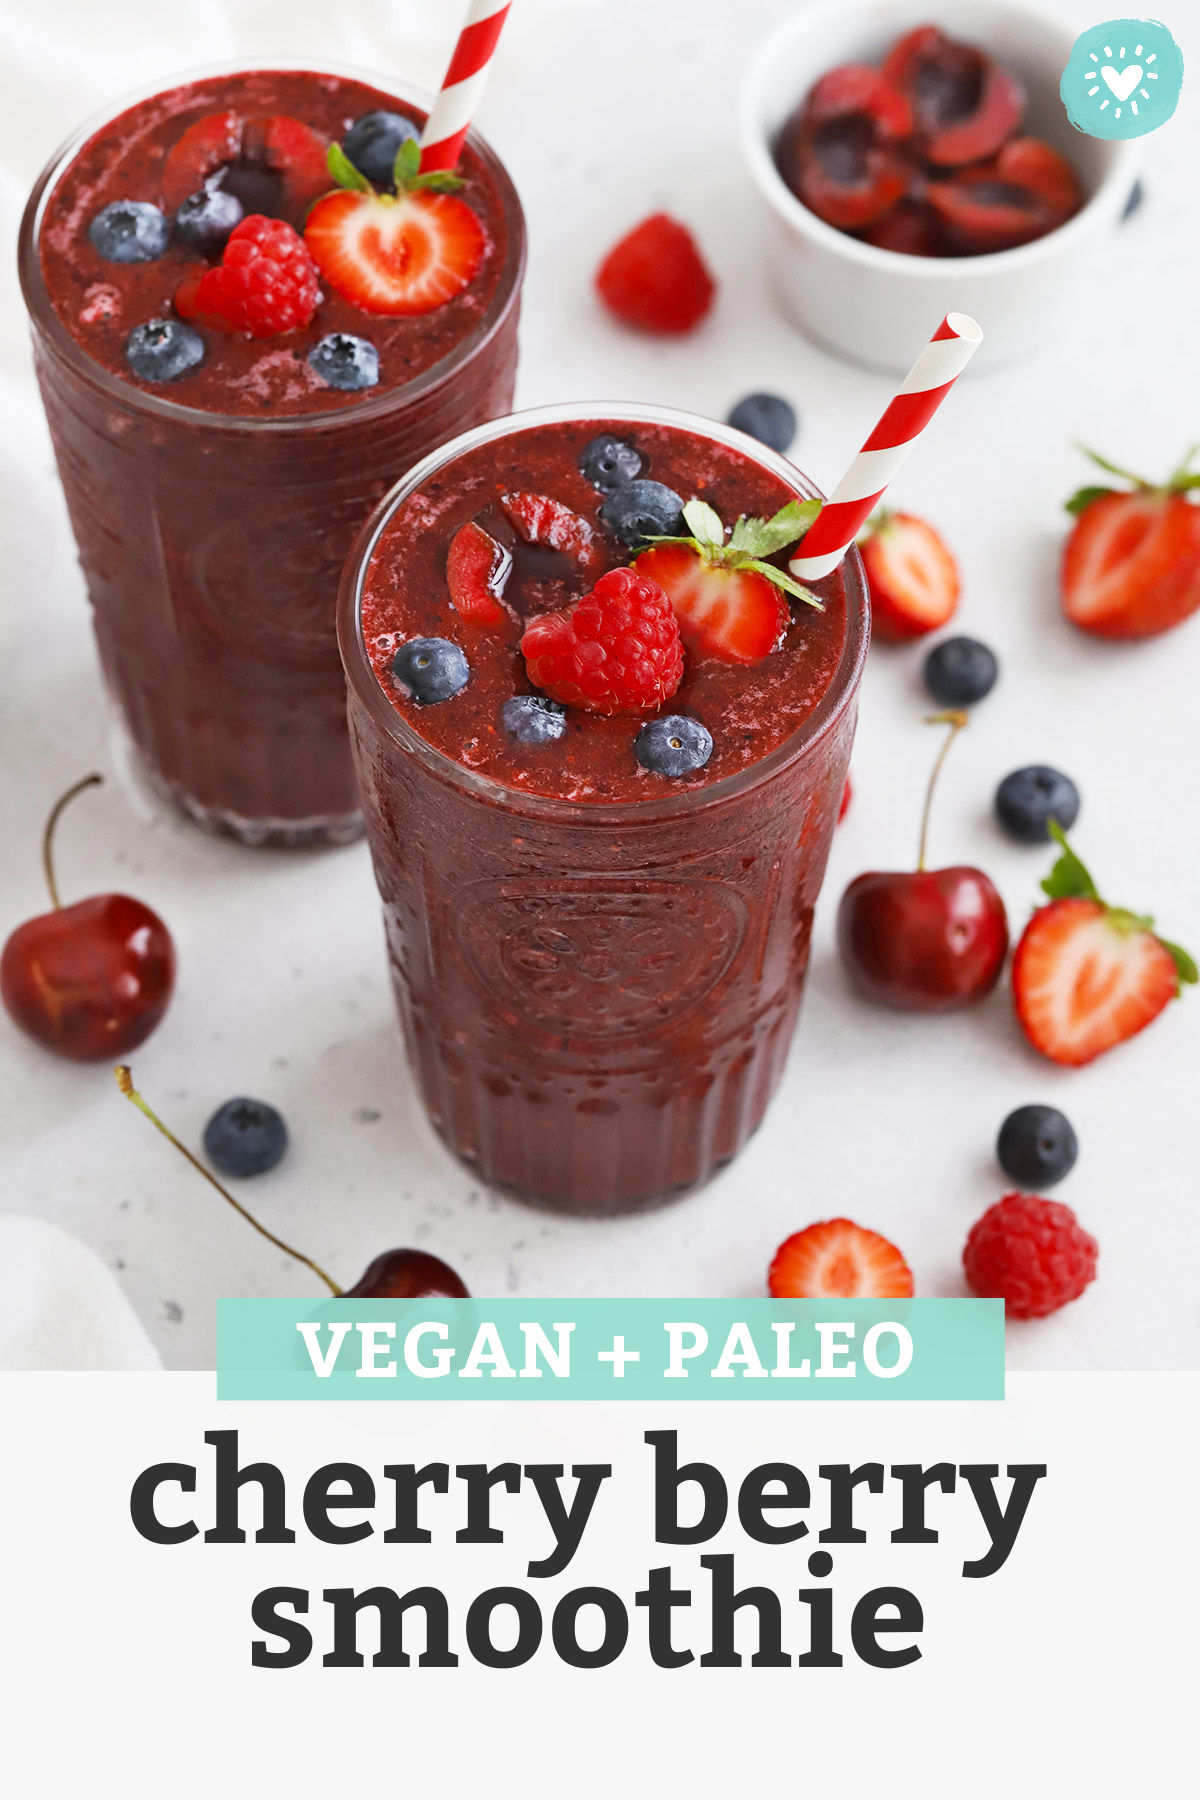 Front view of Cherry Berry Smoothies topped with fresh berries and cherries with text overlay that reads "Vegan + Paleo Cherry Berry Smoothie"